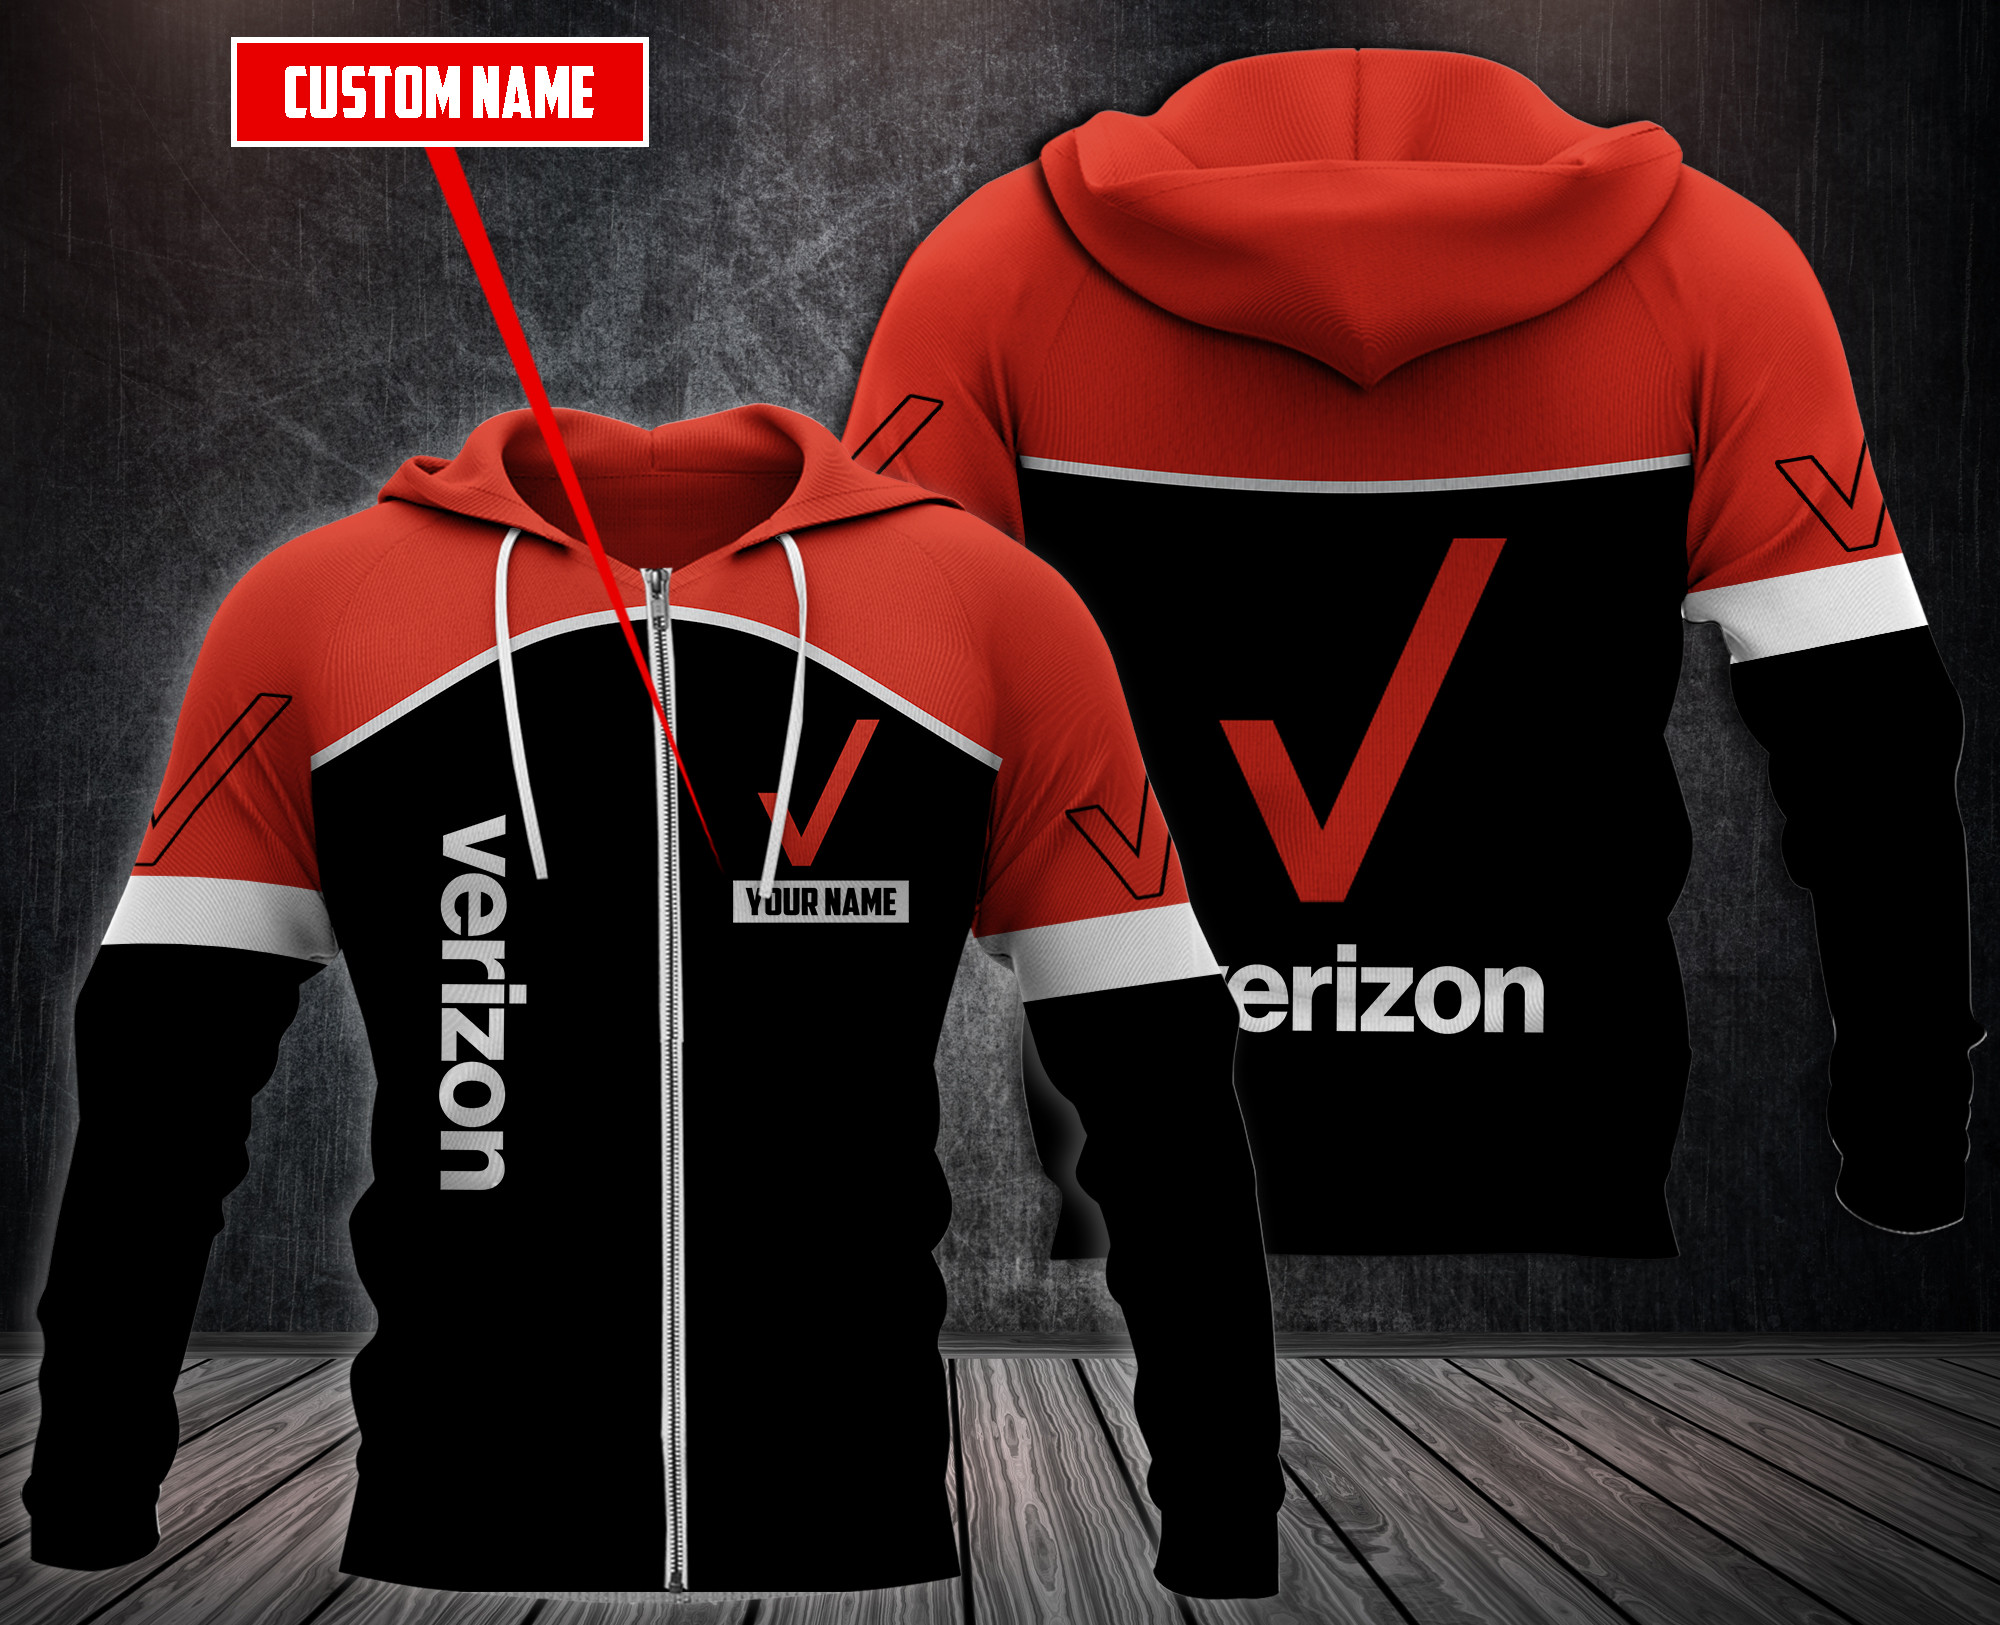 Choose the right hoodies for you on our boxboxshirt and ethershirt websites in 2022 21